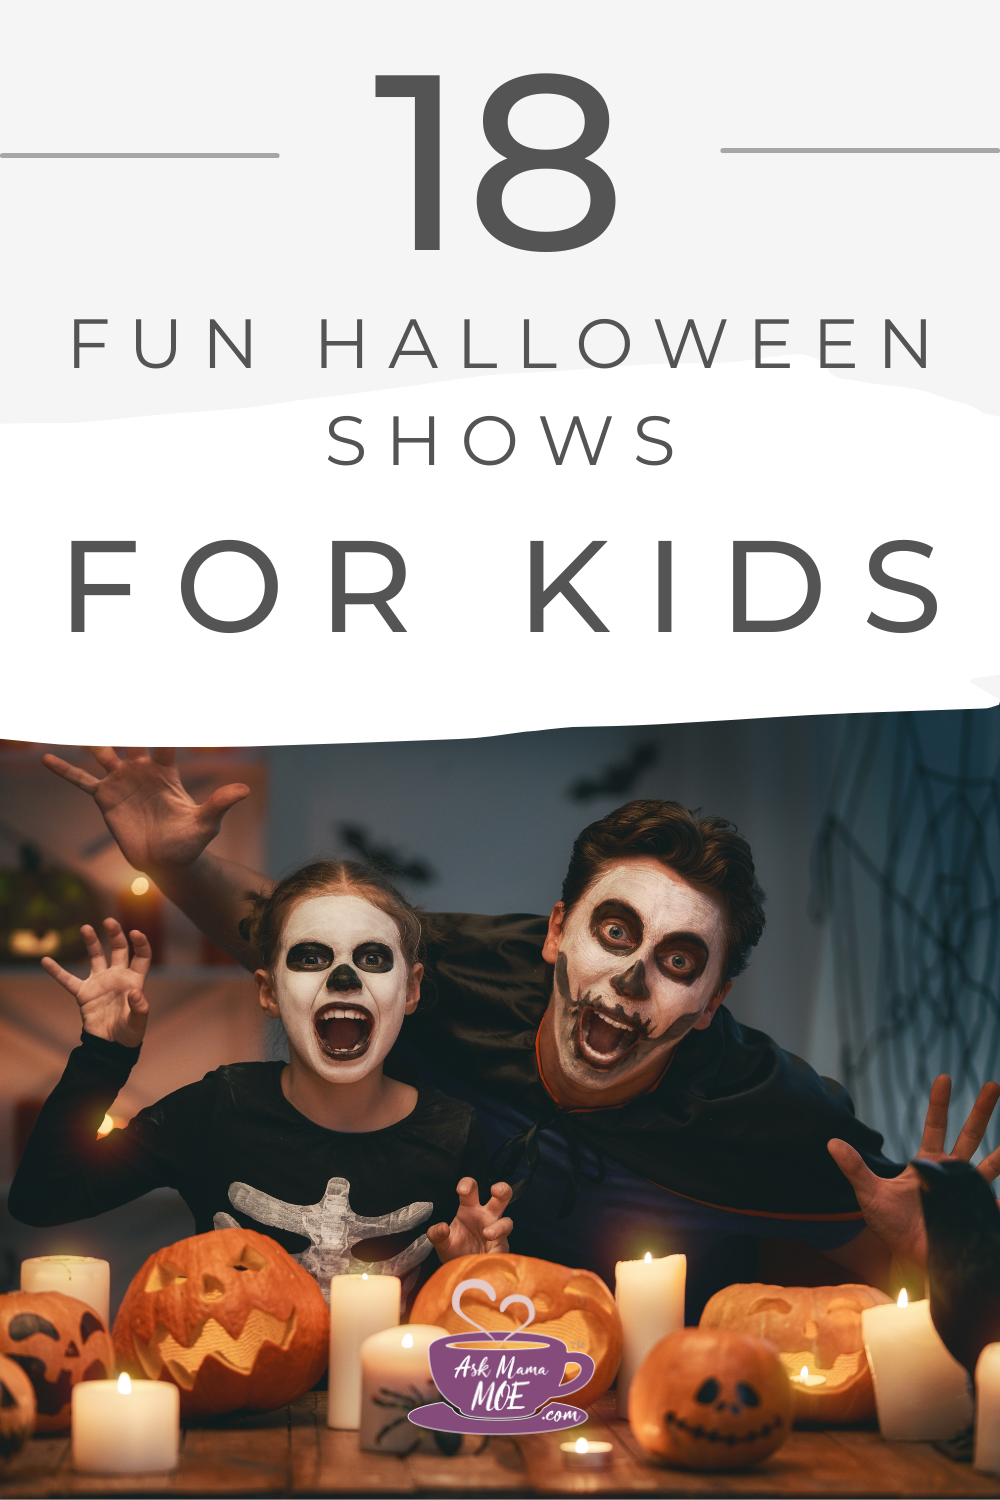 It’s time to get spooky! Today, I’m recommending our favourite Halloween shows for kids. Take note and have a BOO-tacular time this spooky season!